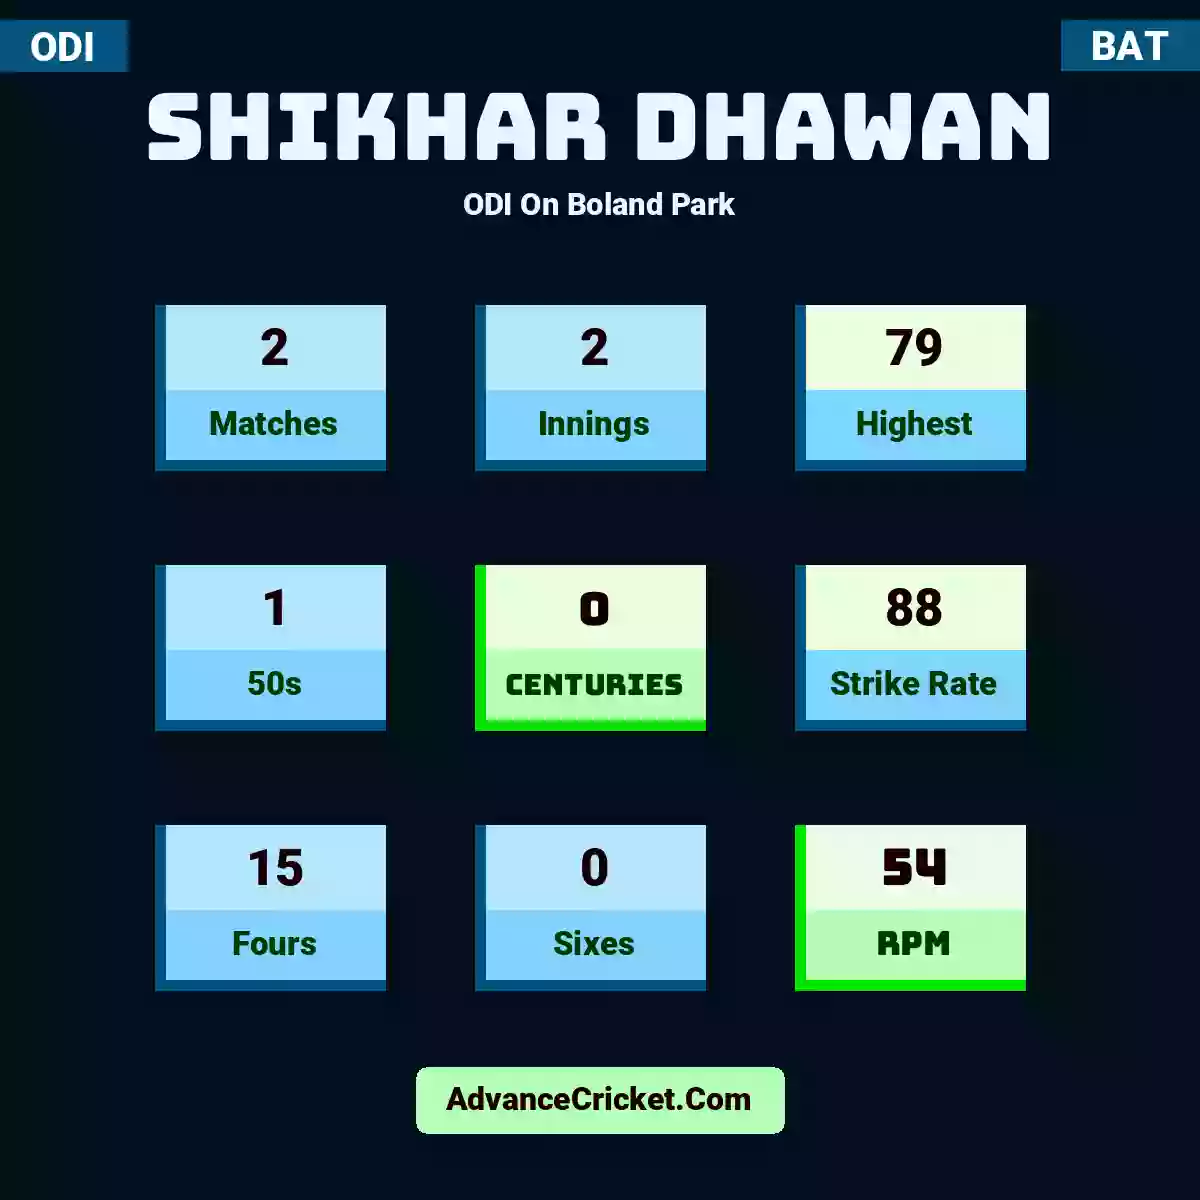 Shikhar Dhawan ODI  On Boland Park, Shikhar Dhawan played 2 matches, scored 79 runs as highest, 1 half-centuries, and 0 centuries, with a strike rate of 88. S.Dhawan hit 15 fours and 0 sixes, with an RPM of 54.